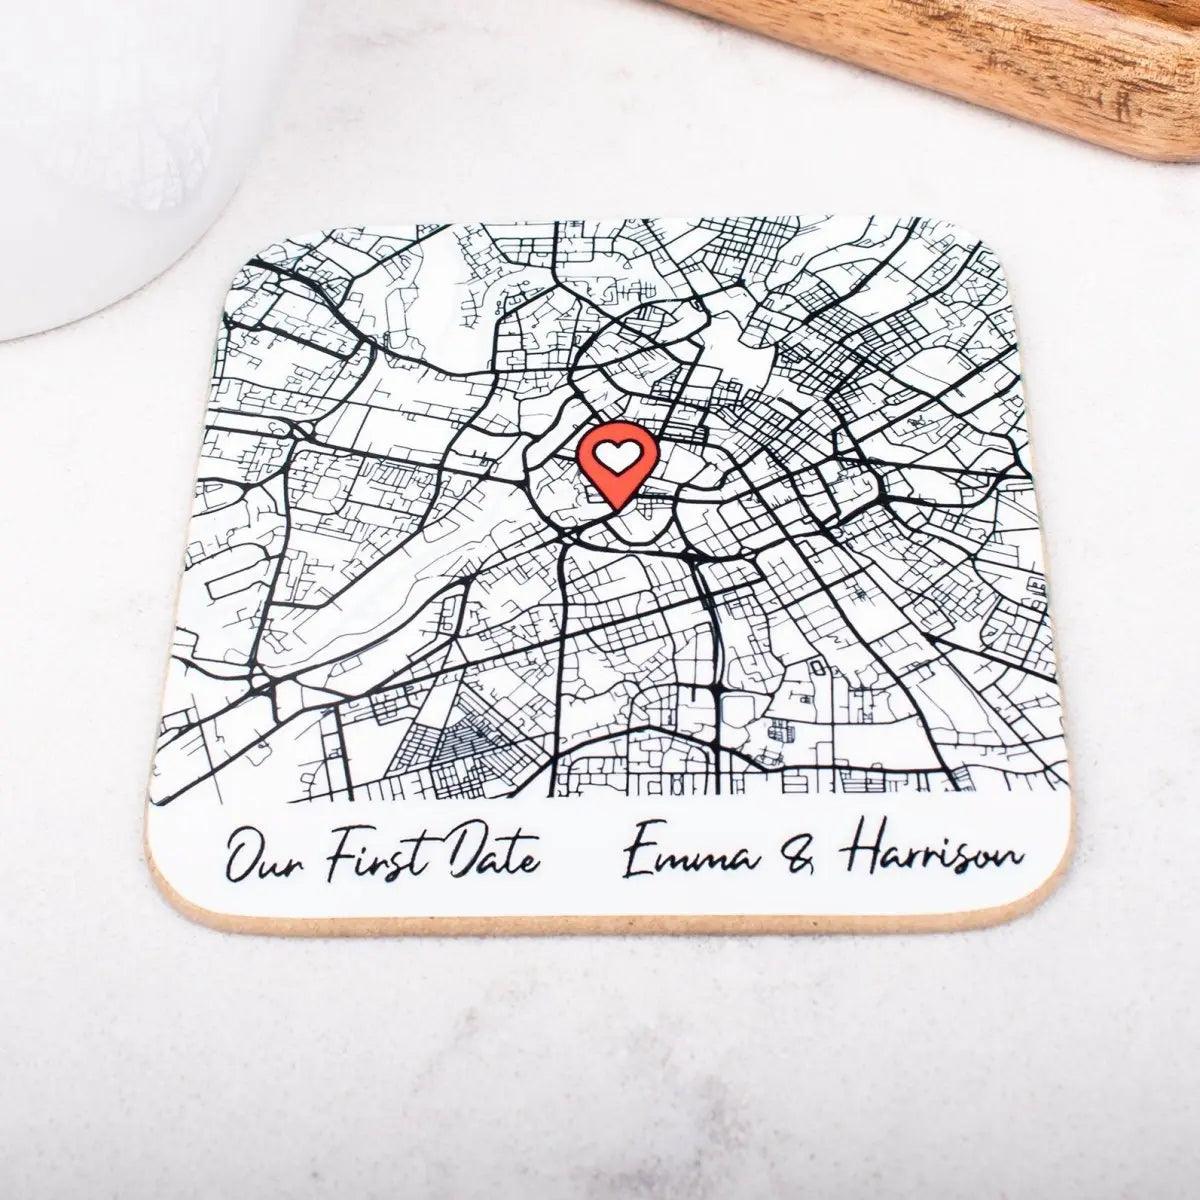 Personalised Script Map Pin Coaster, Couples Gift, Lovers Present, Custom Map Name, Keepsake, Boyfriend, Girlfriend, Husband, Wife, Engaged - Amy Lucy